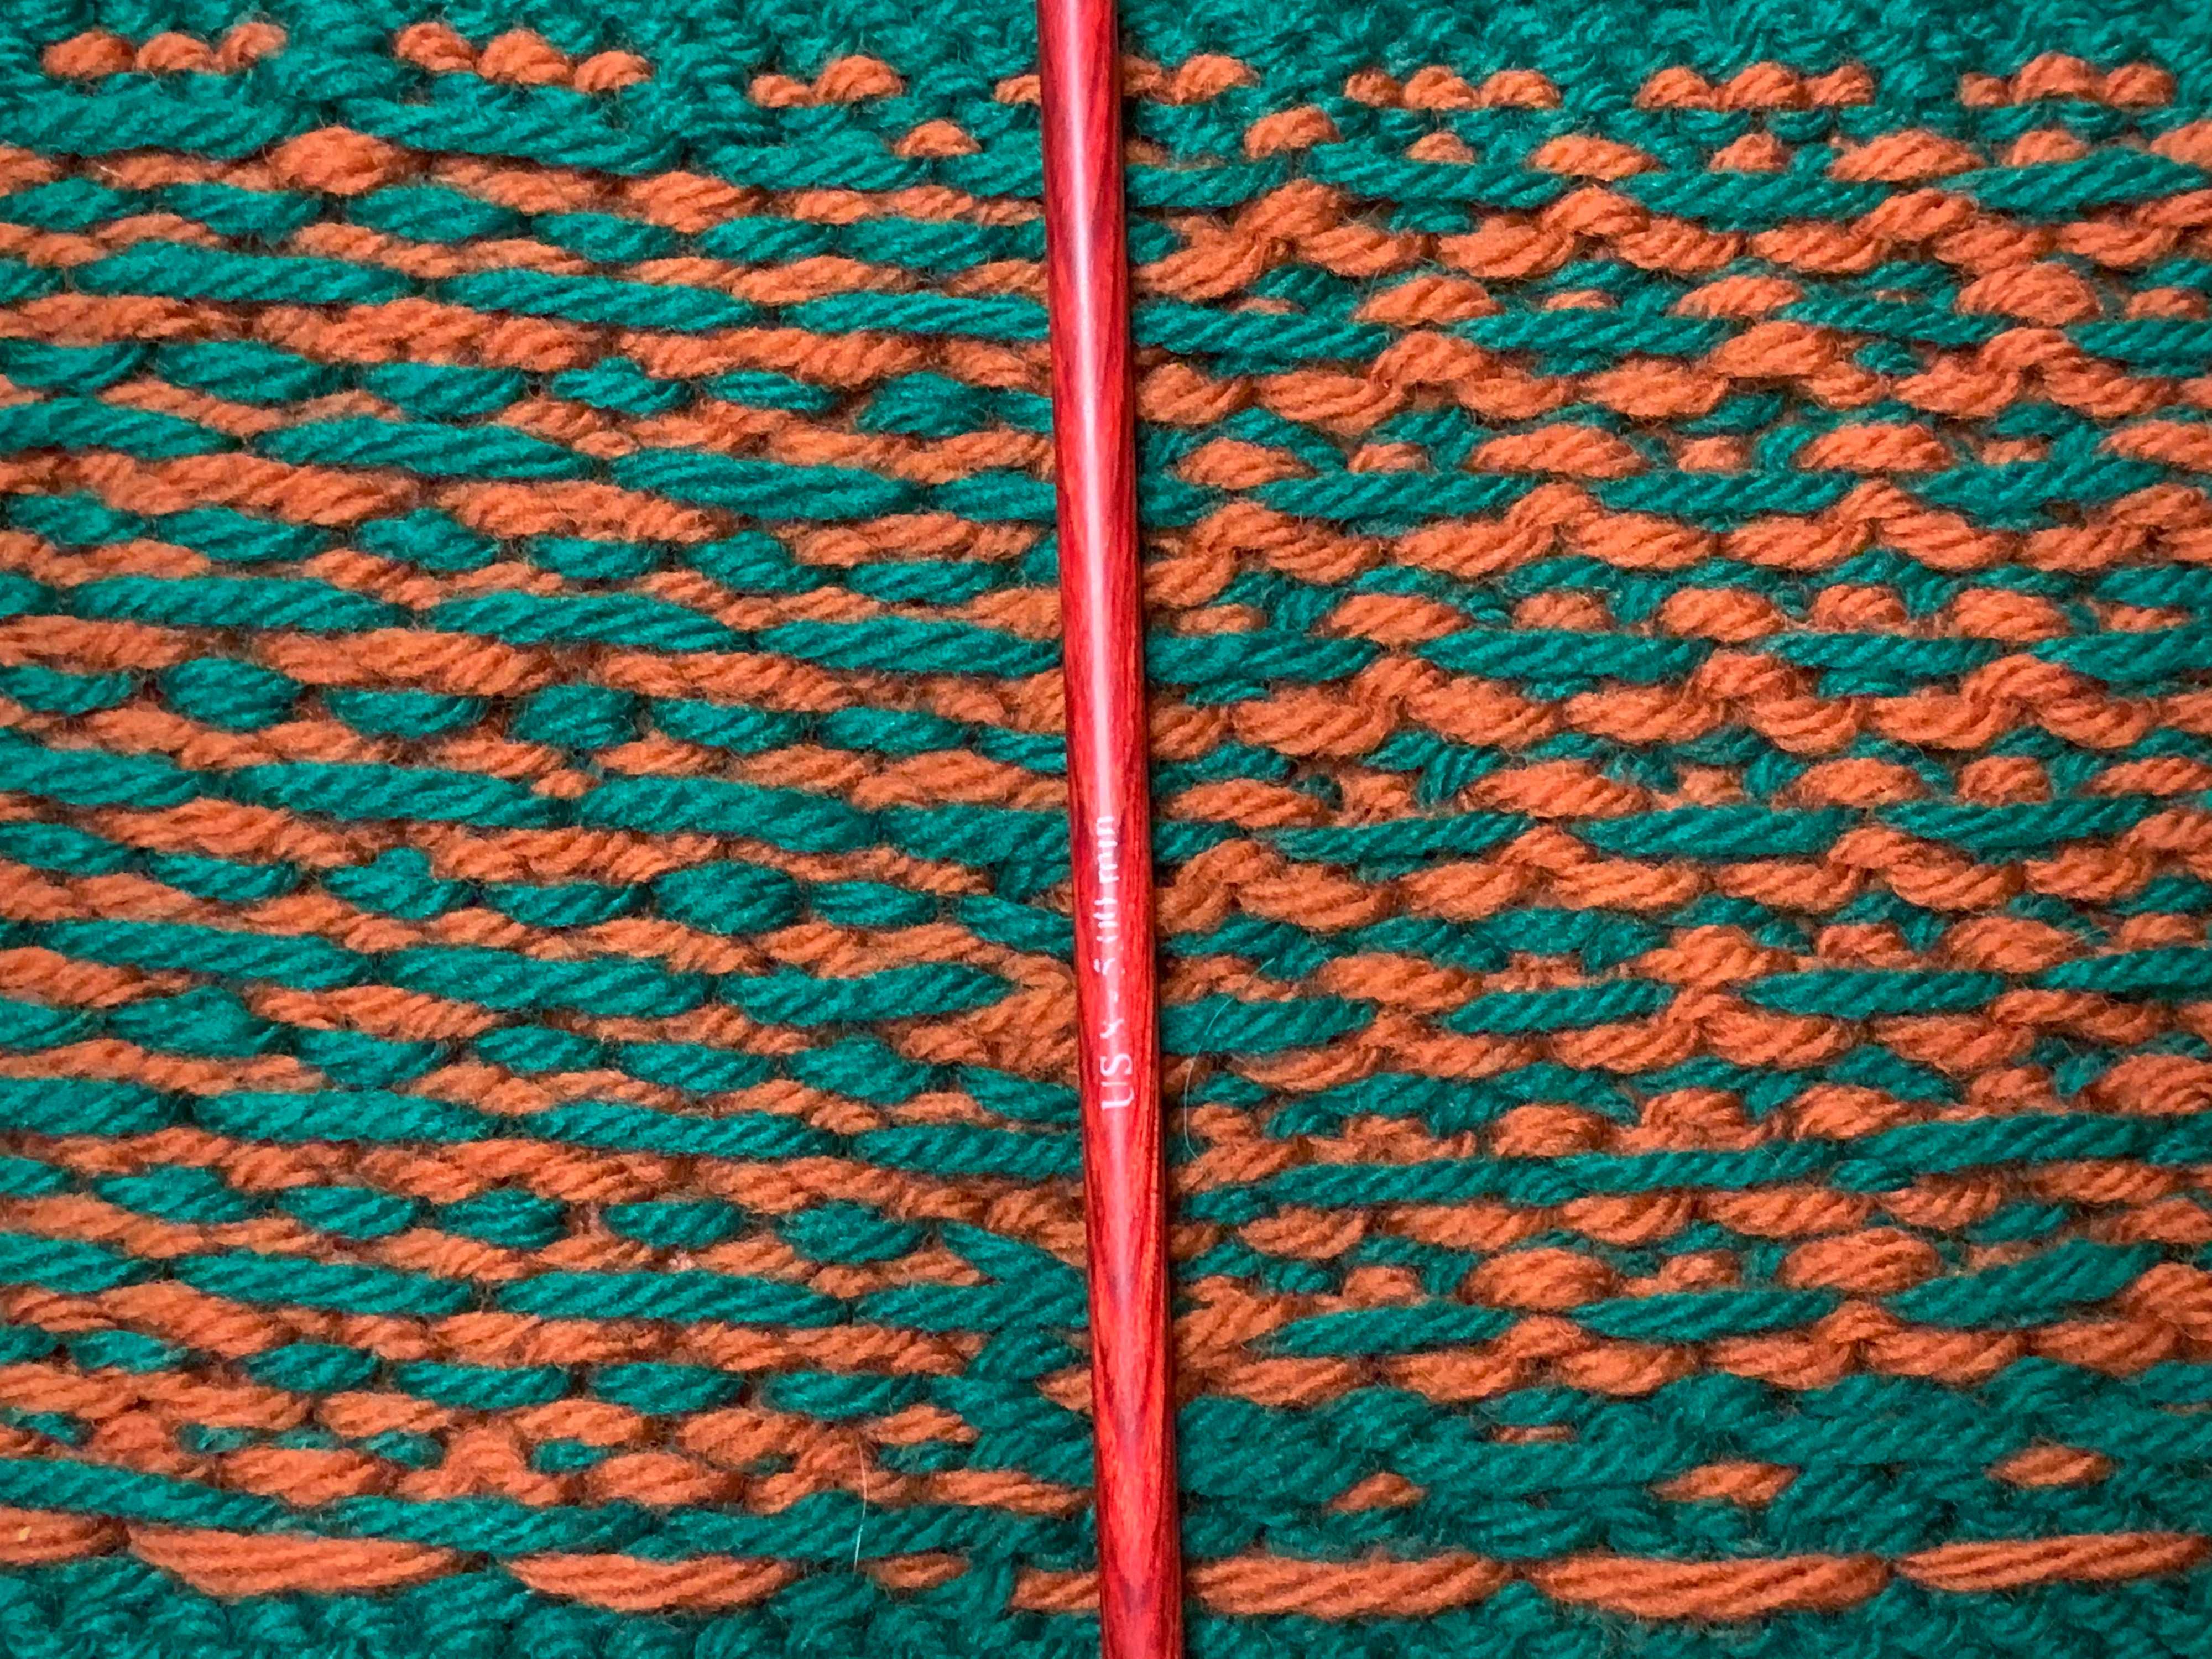 The reverse side of my sample shows how the floats appear differently when the yarn dominance is switched.